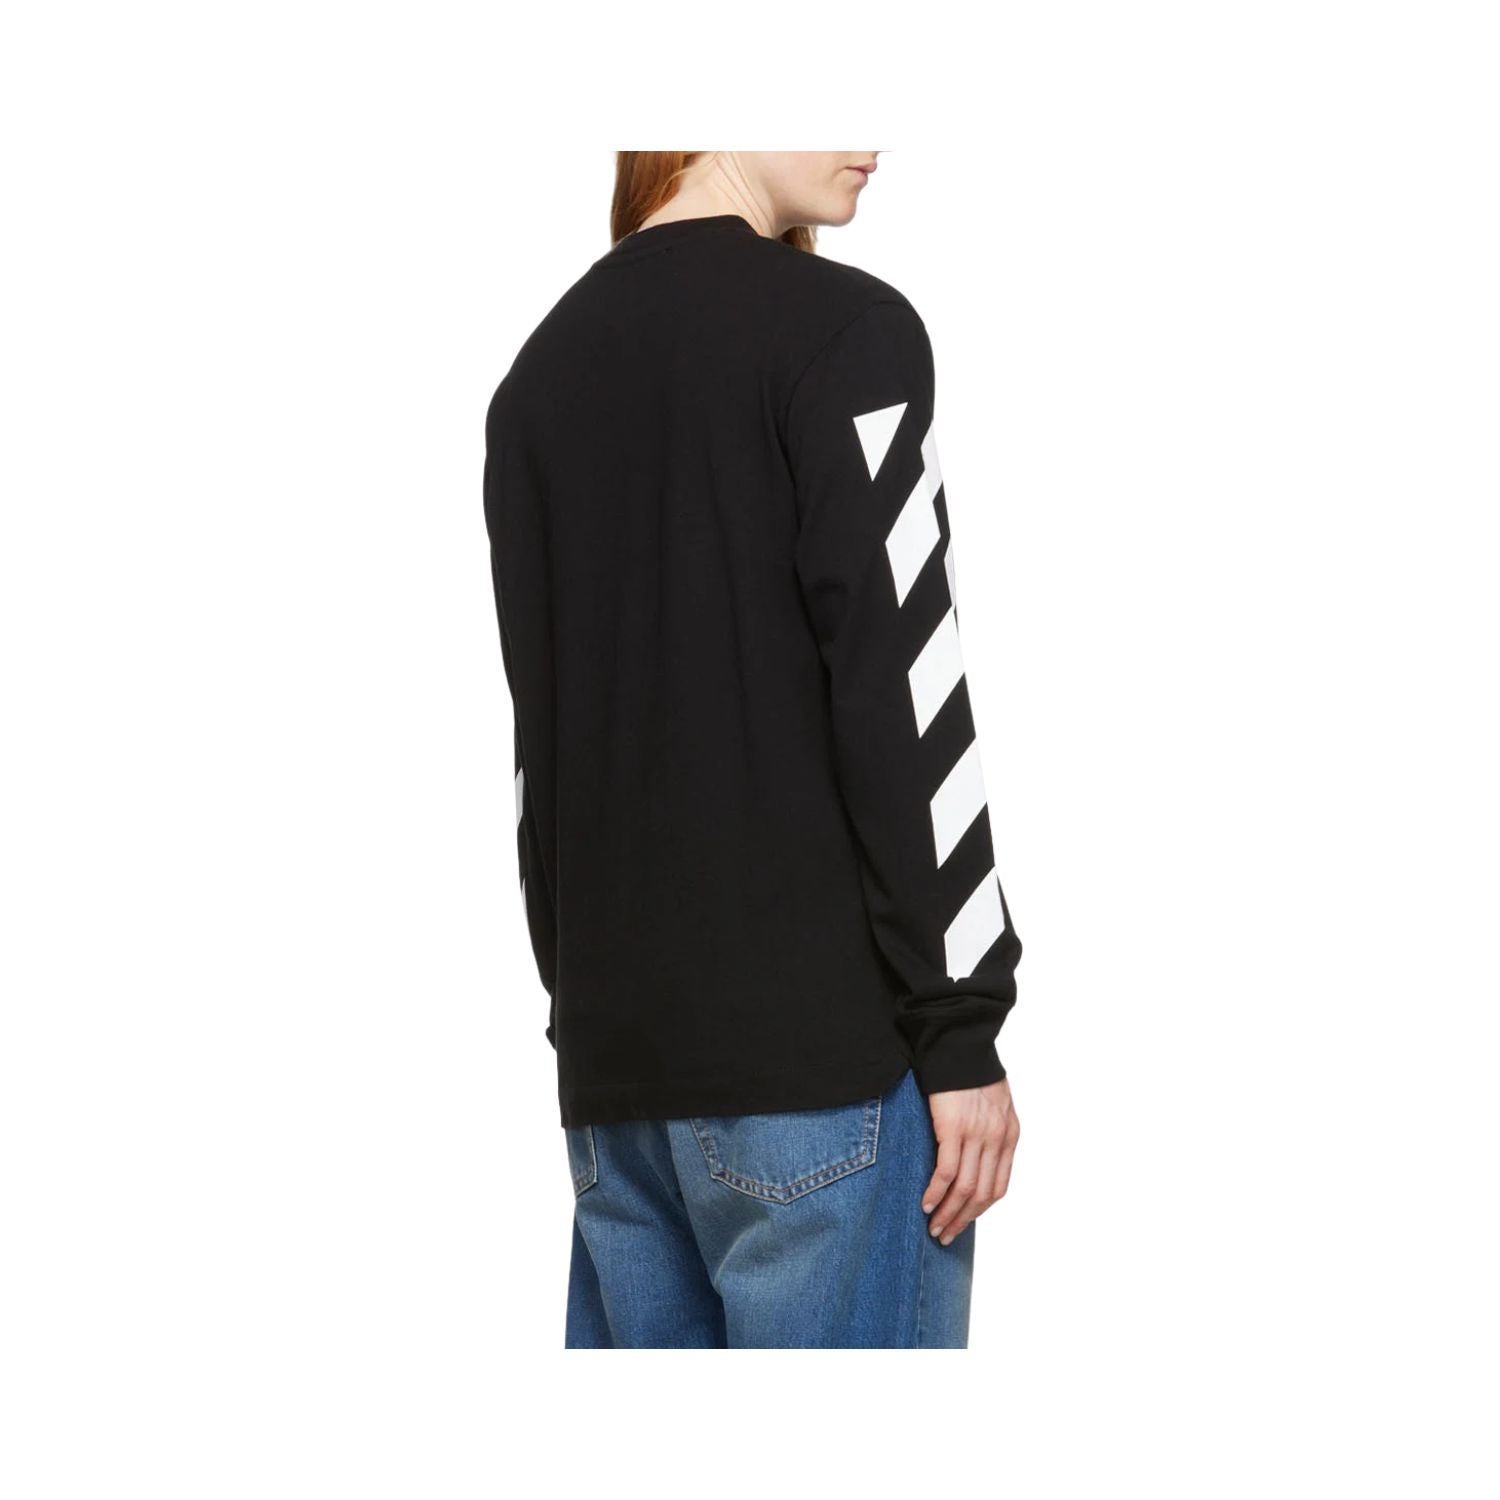 Off-white Diag Arrow Skate L/s Tee Mens Style : Omab064c99jer01